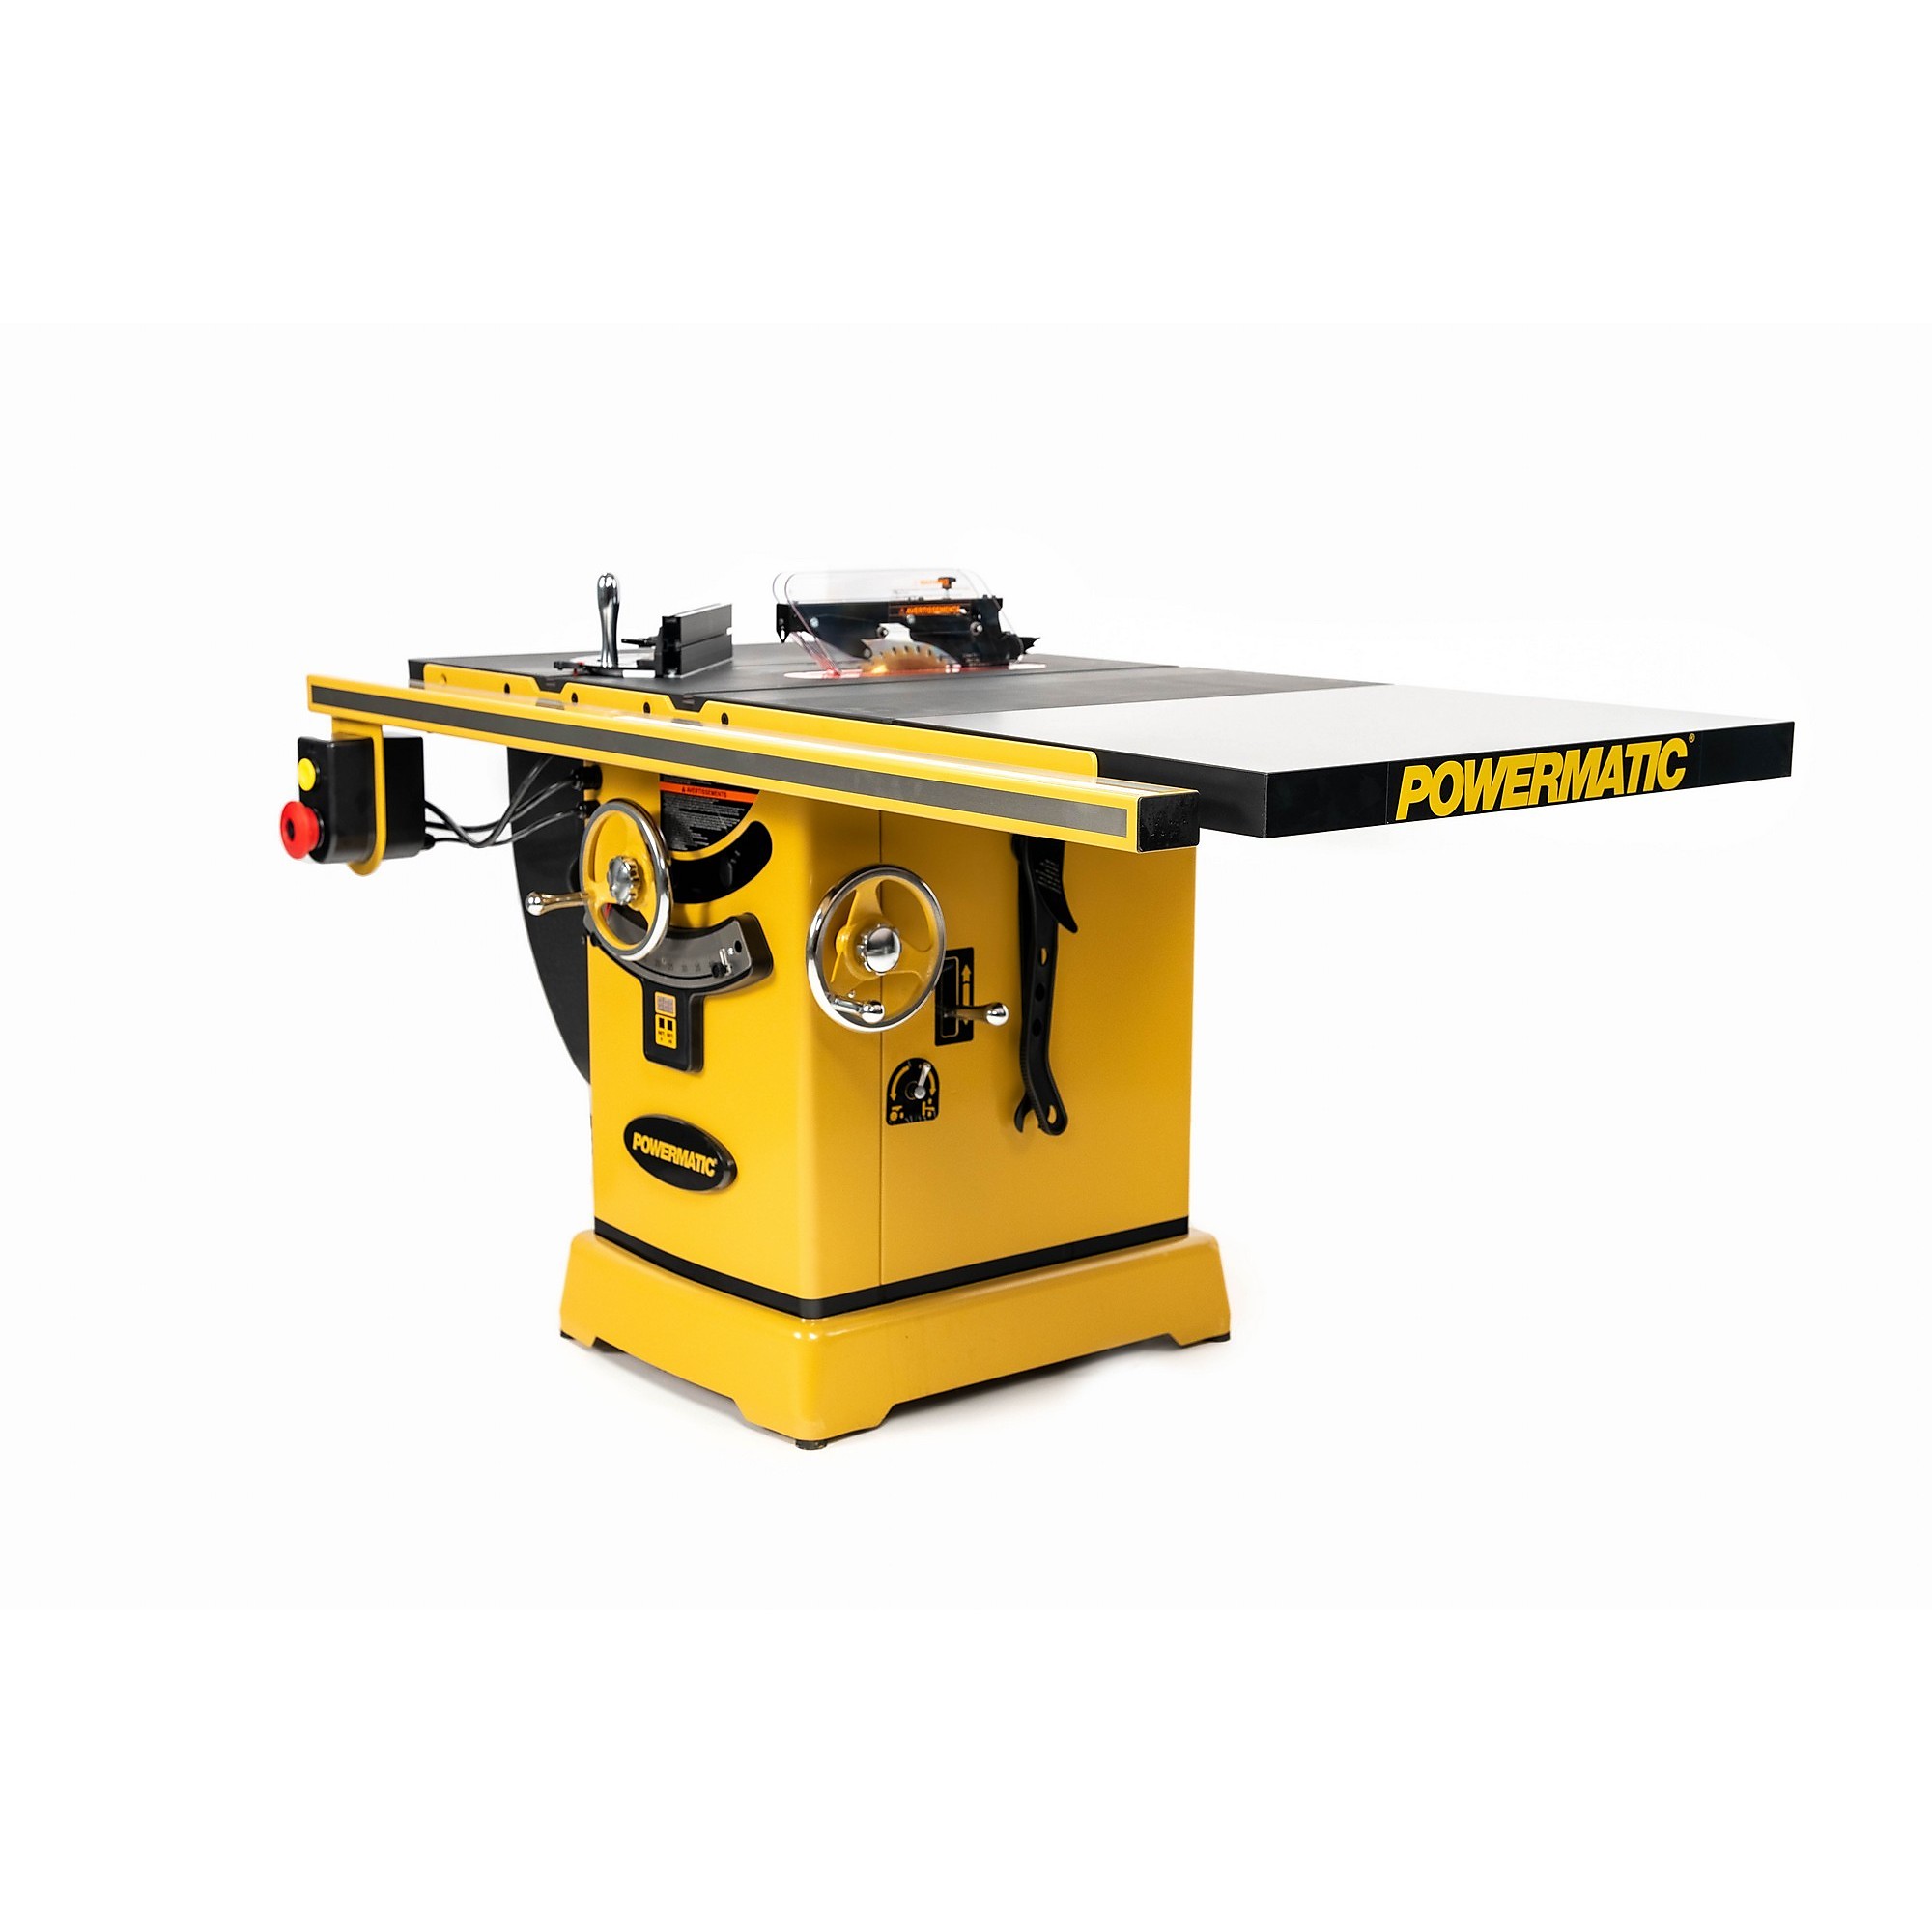 Powermatic, ArmorGlide Table Saw, Blade Diameter 10 Horsepower 5 HP, Volts 230 Model PM2000T